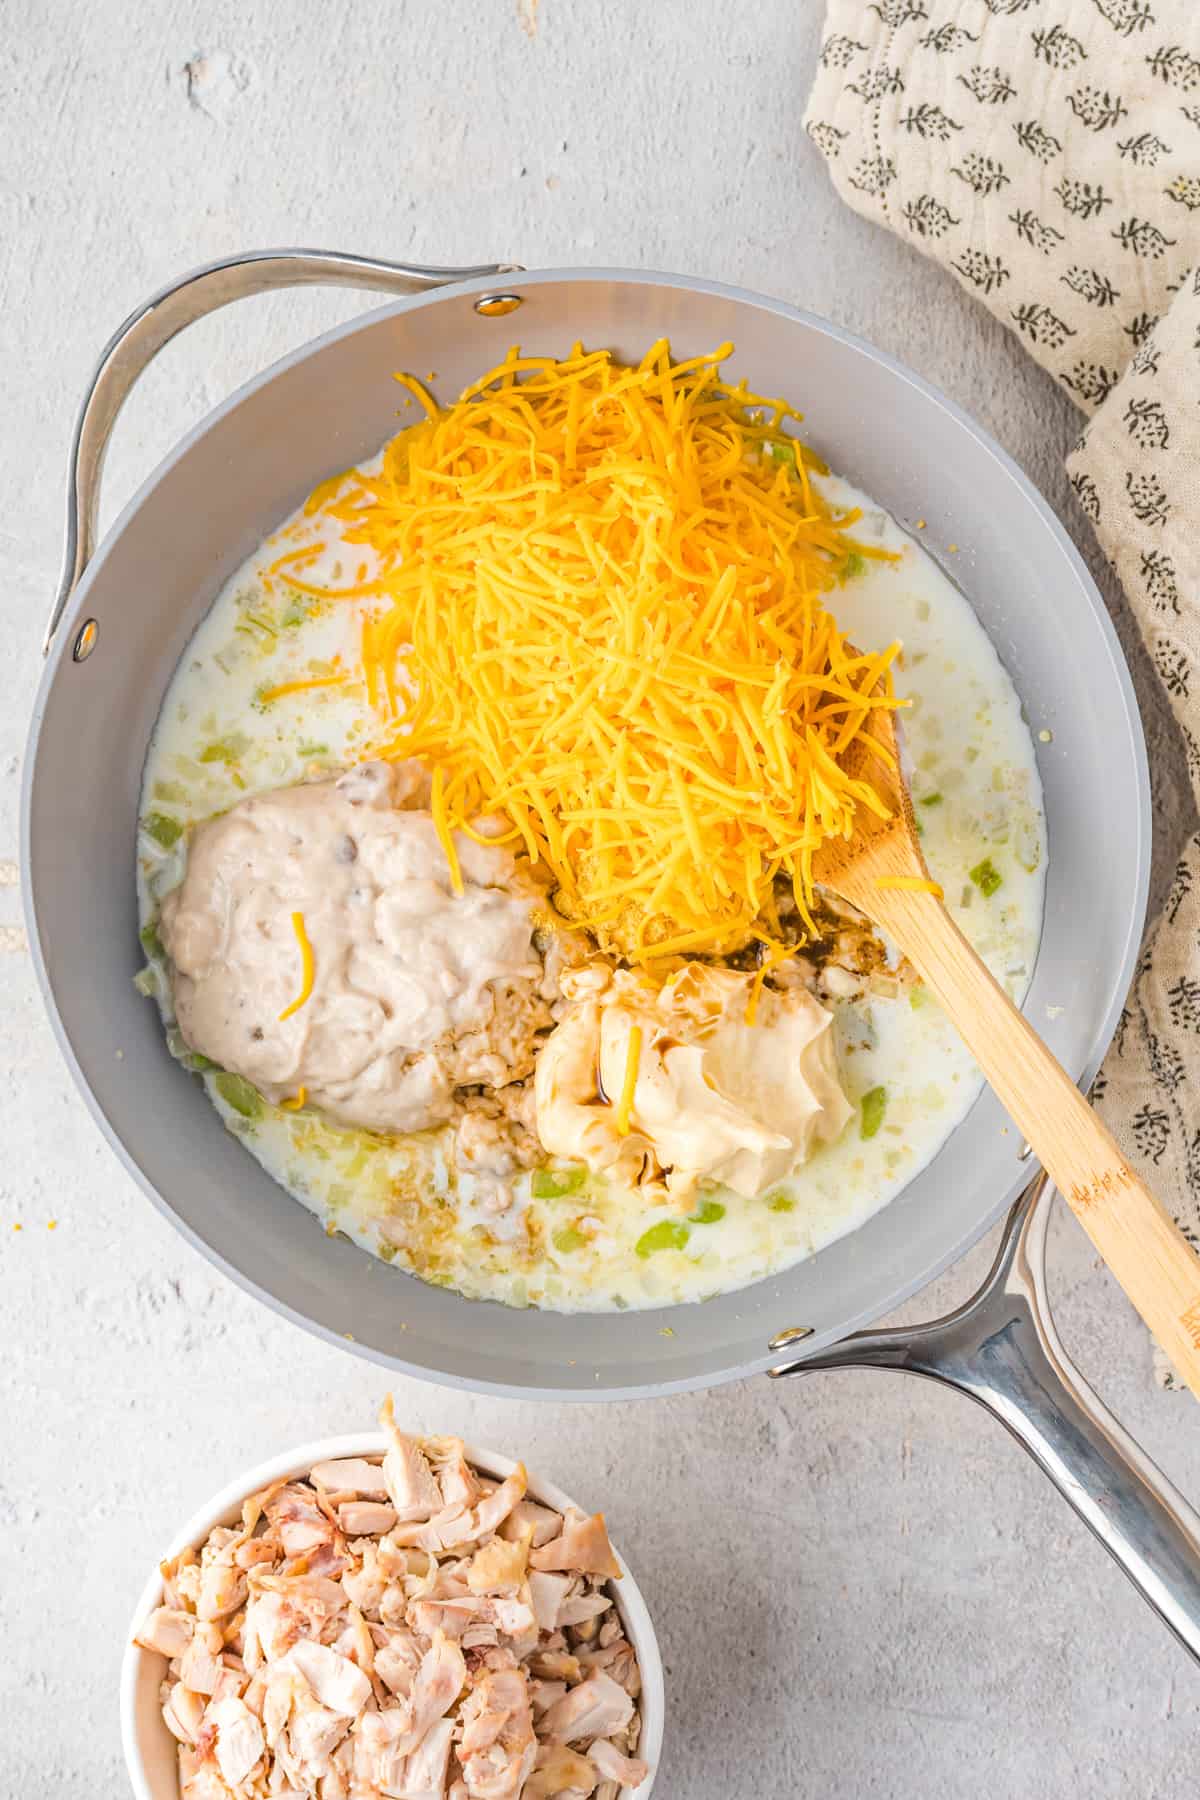 Shredded cheese, soup, mayo, sour cream, and other ingredients added to pan.